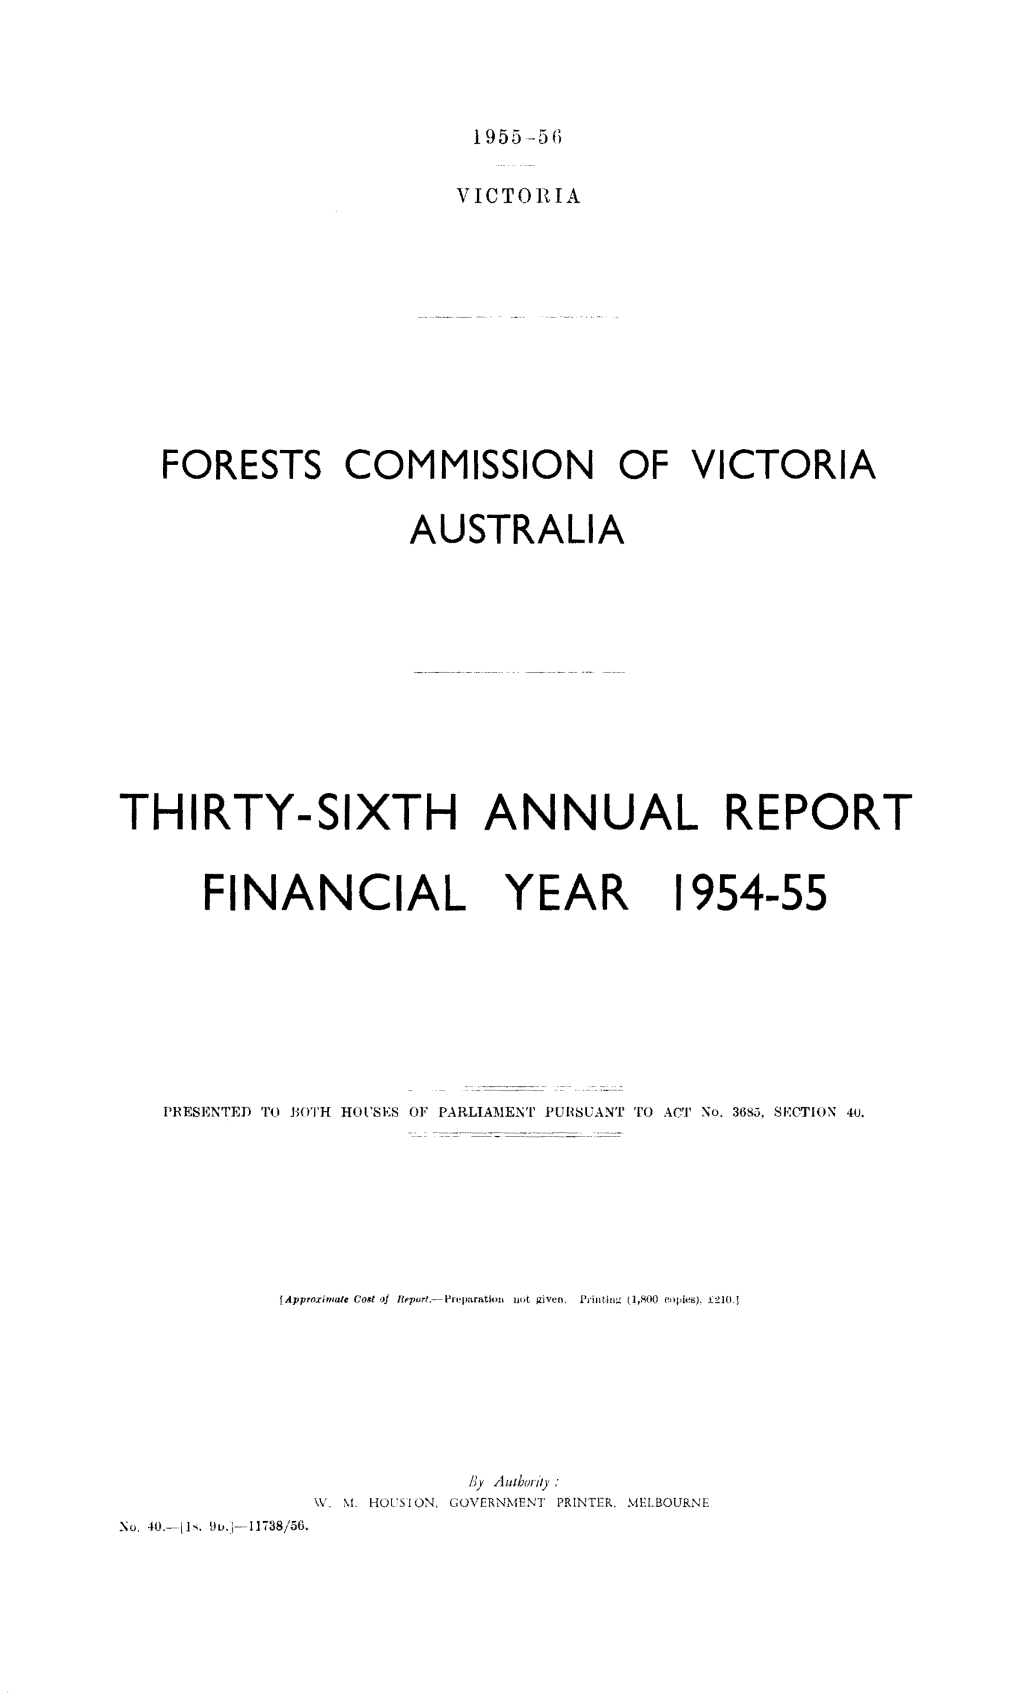 Thirty-Sixth Annual Report Financial Year 1954-55